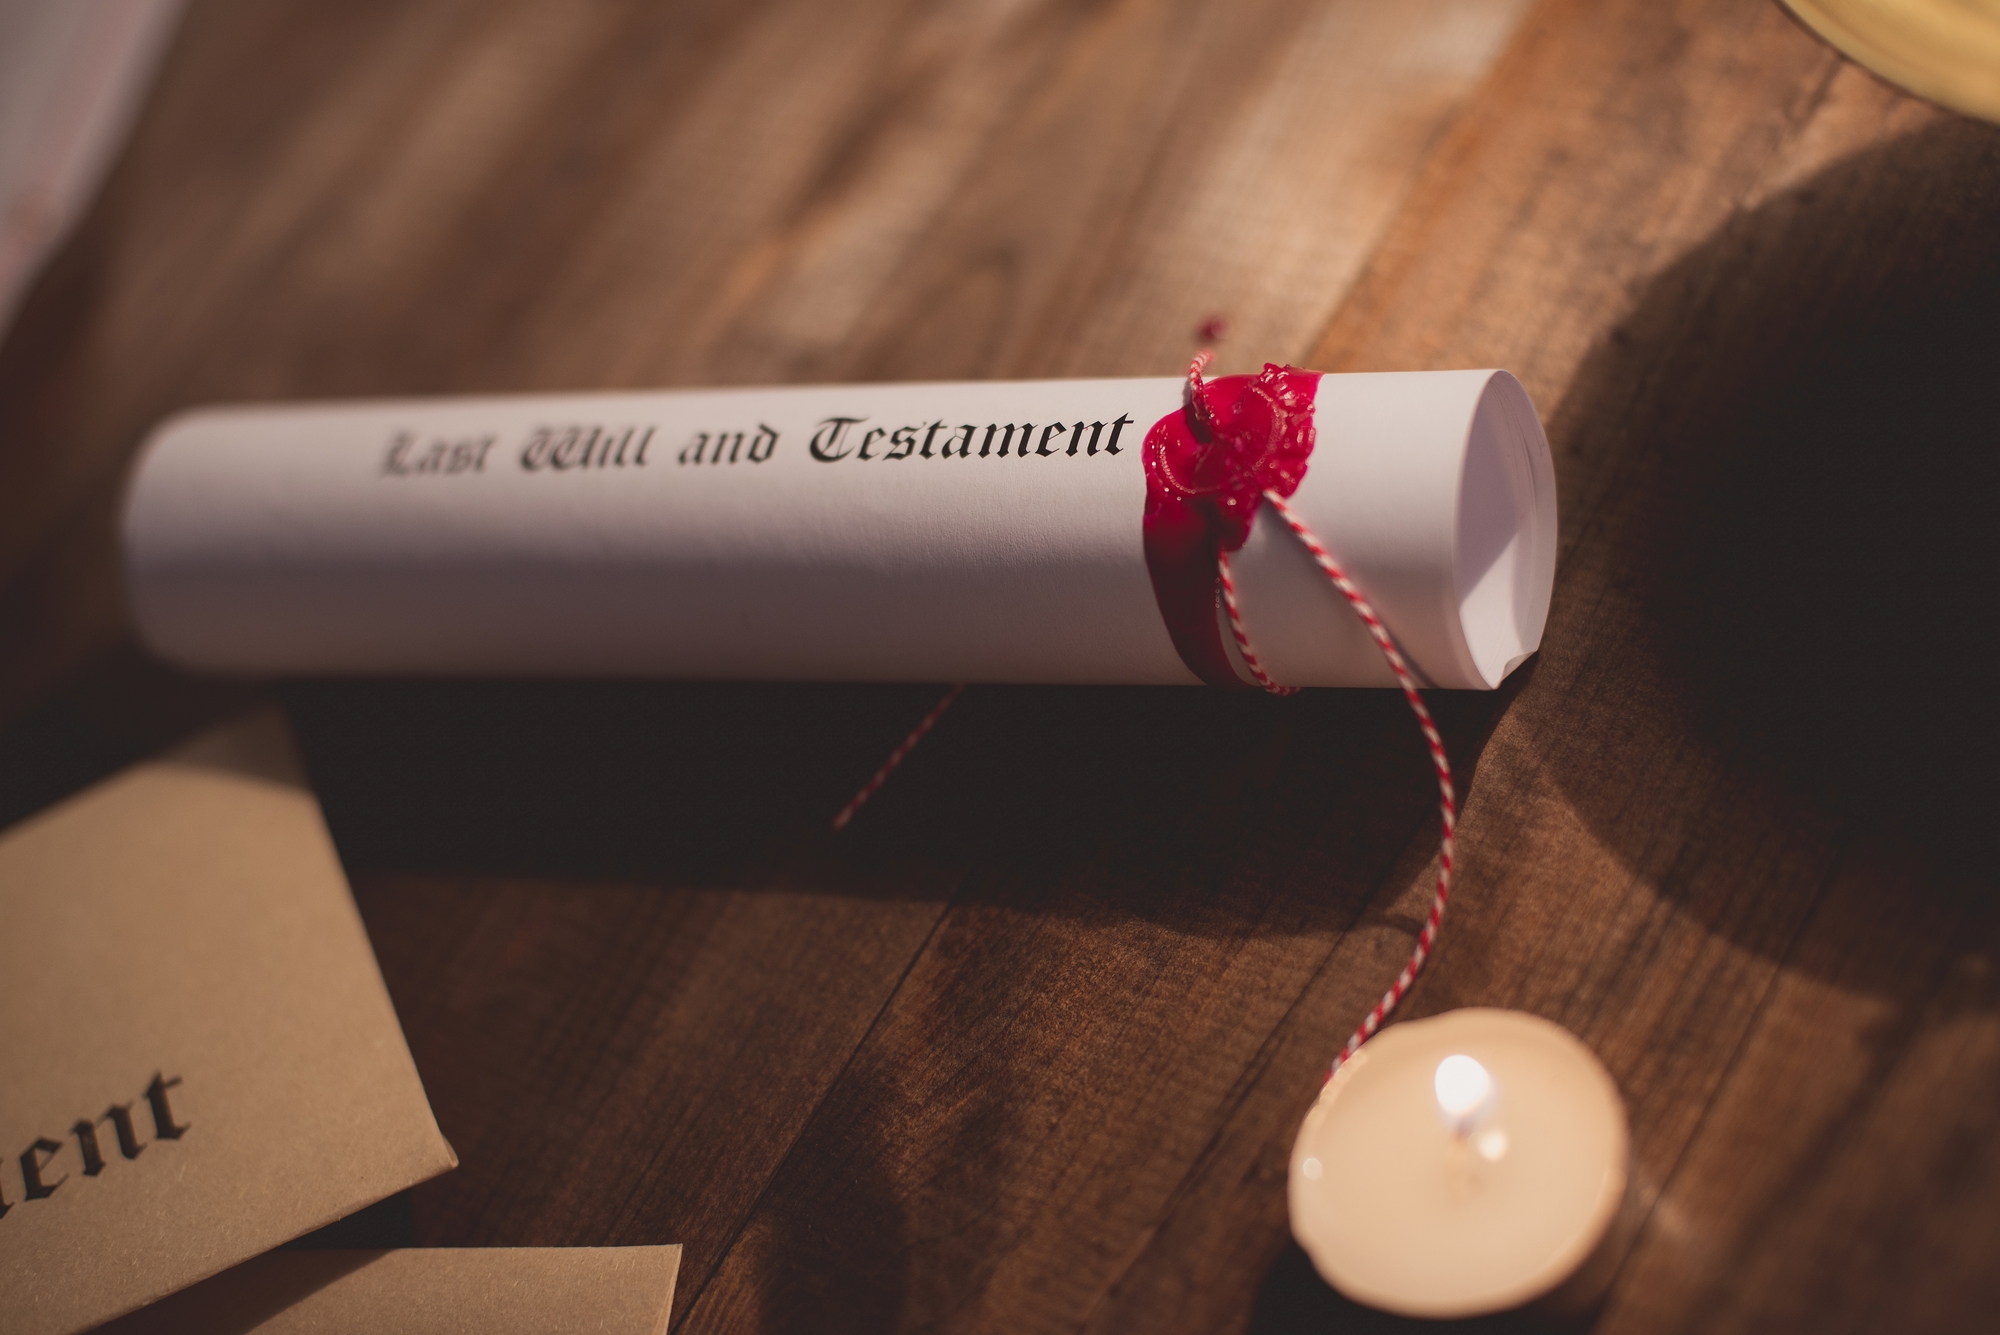 How To Manage Your Grief And Be An Executor - Notary public wax stamp and testament